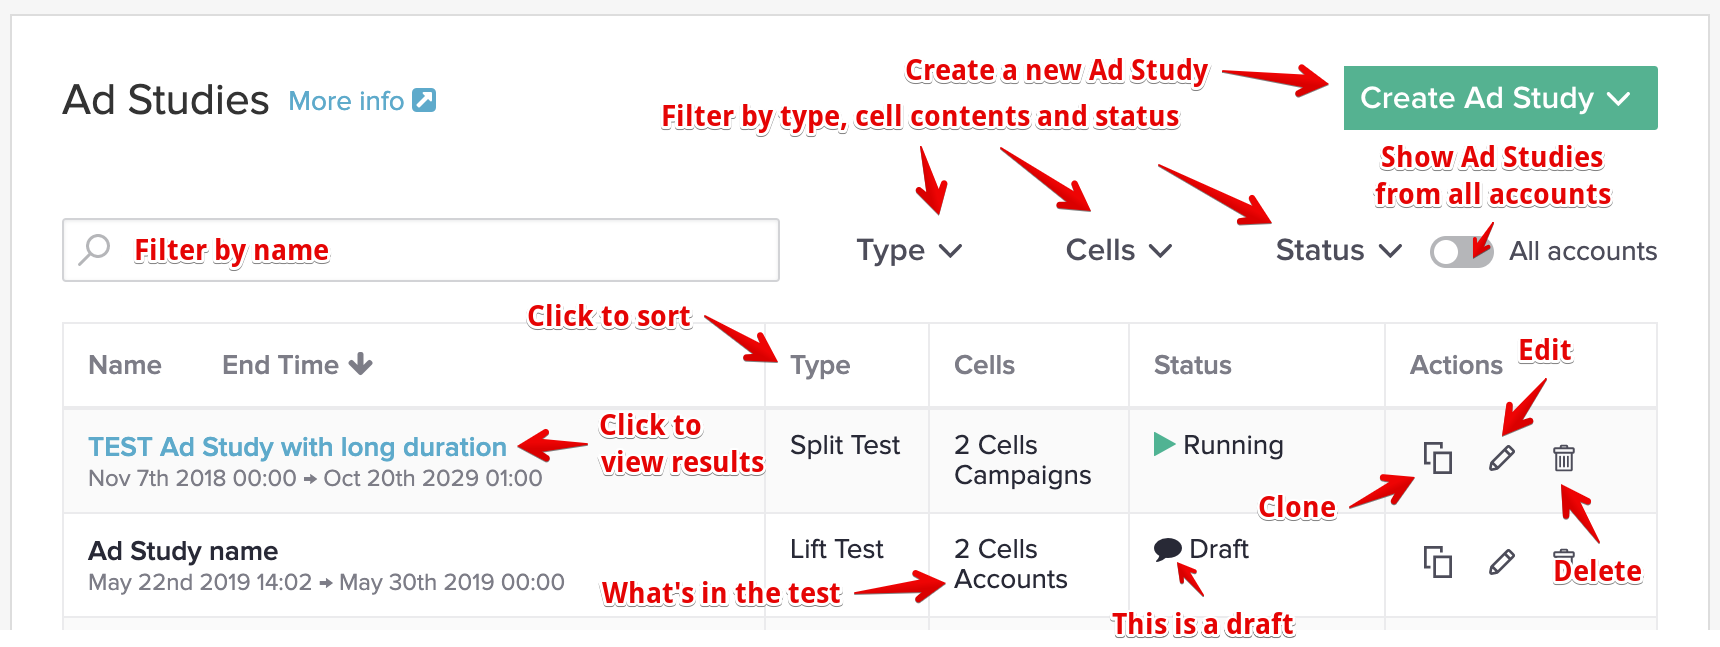 How to do Facebook ads testing on Smartly.io - marked up screenshot showing the Ad Studies user interface